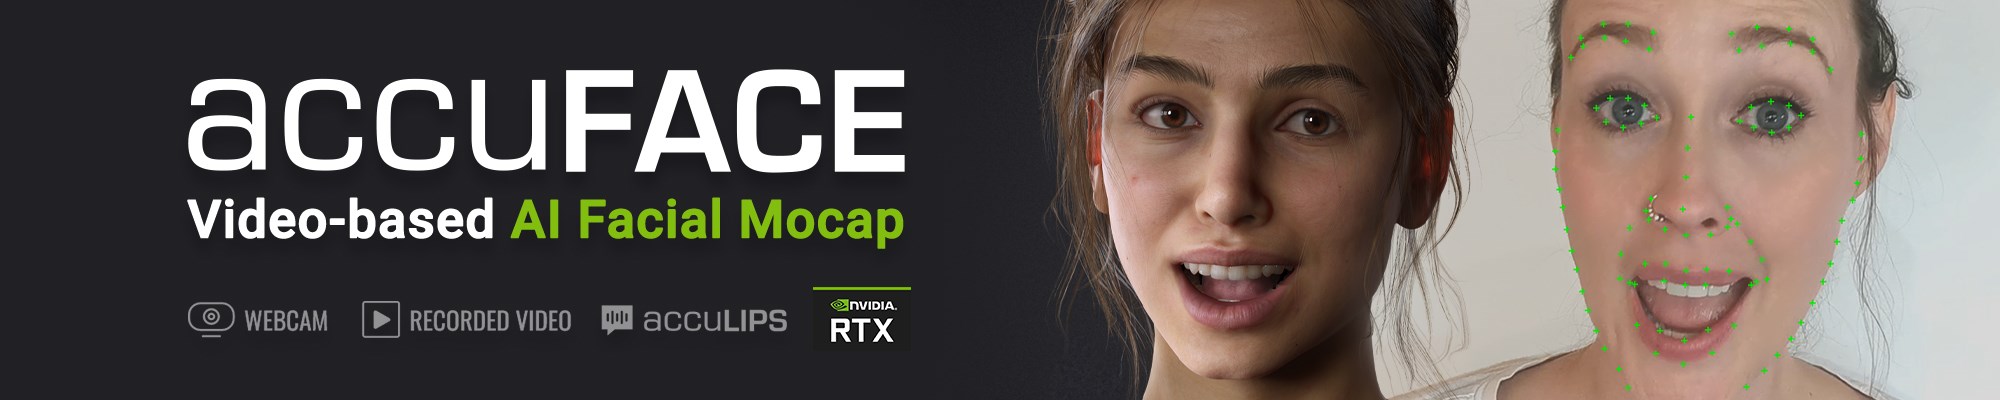 AccuFACE - AI Facial Mocap from Live or Recorded Video